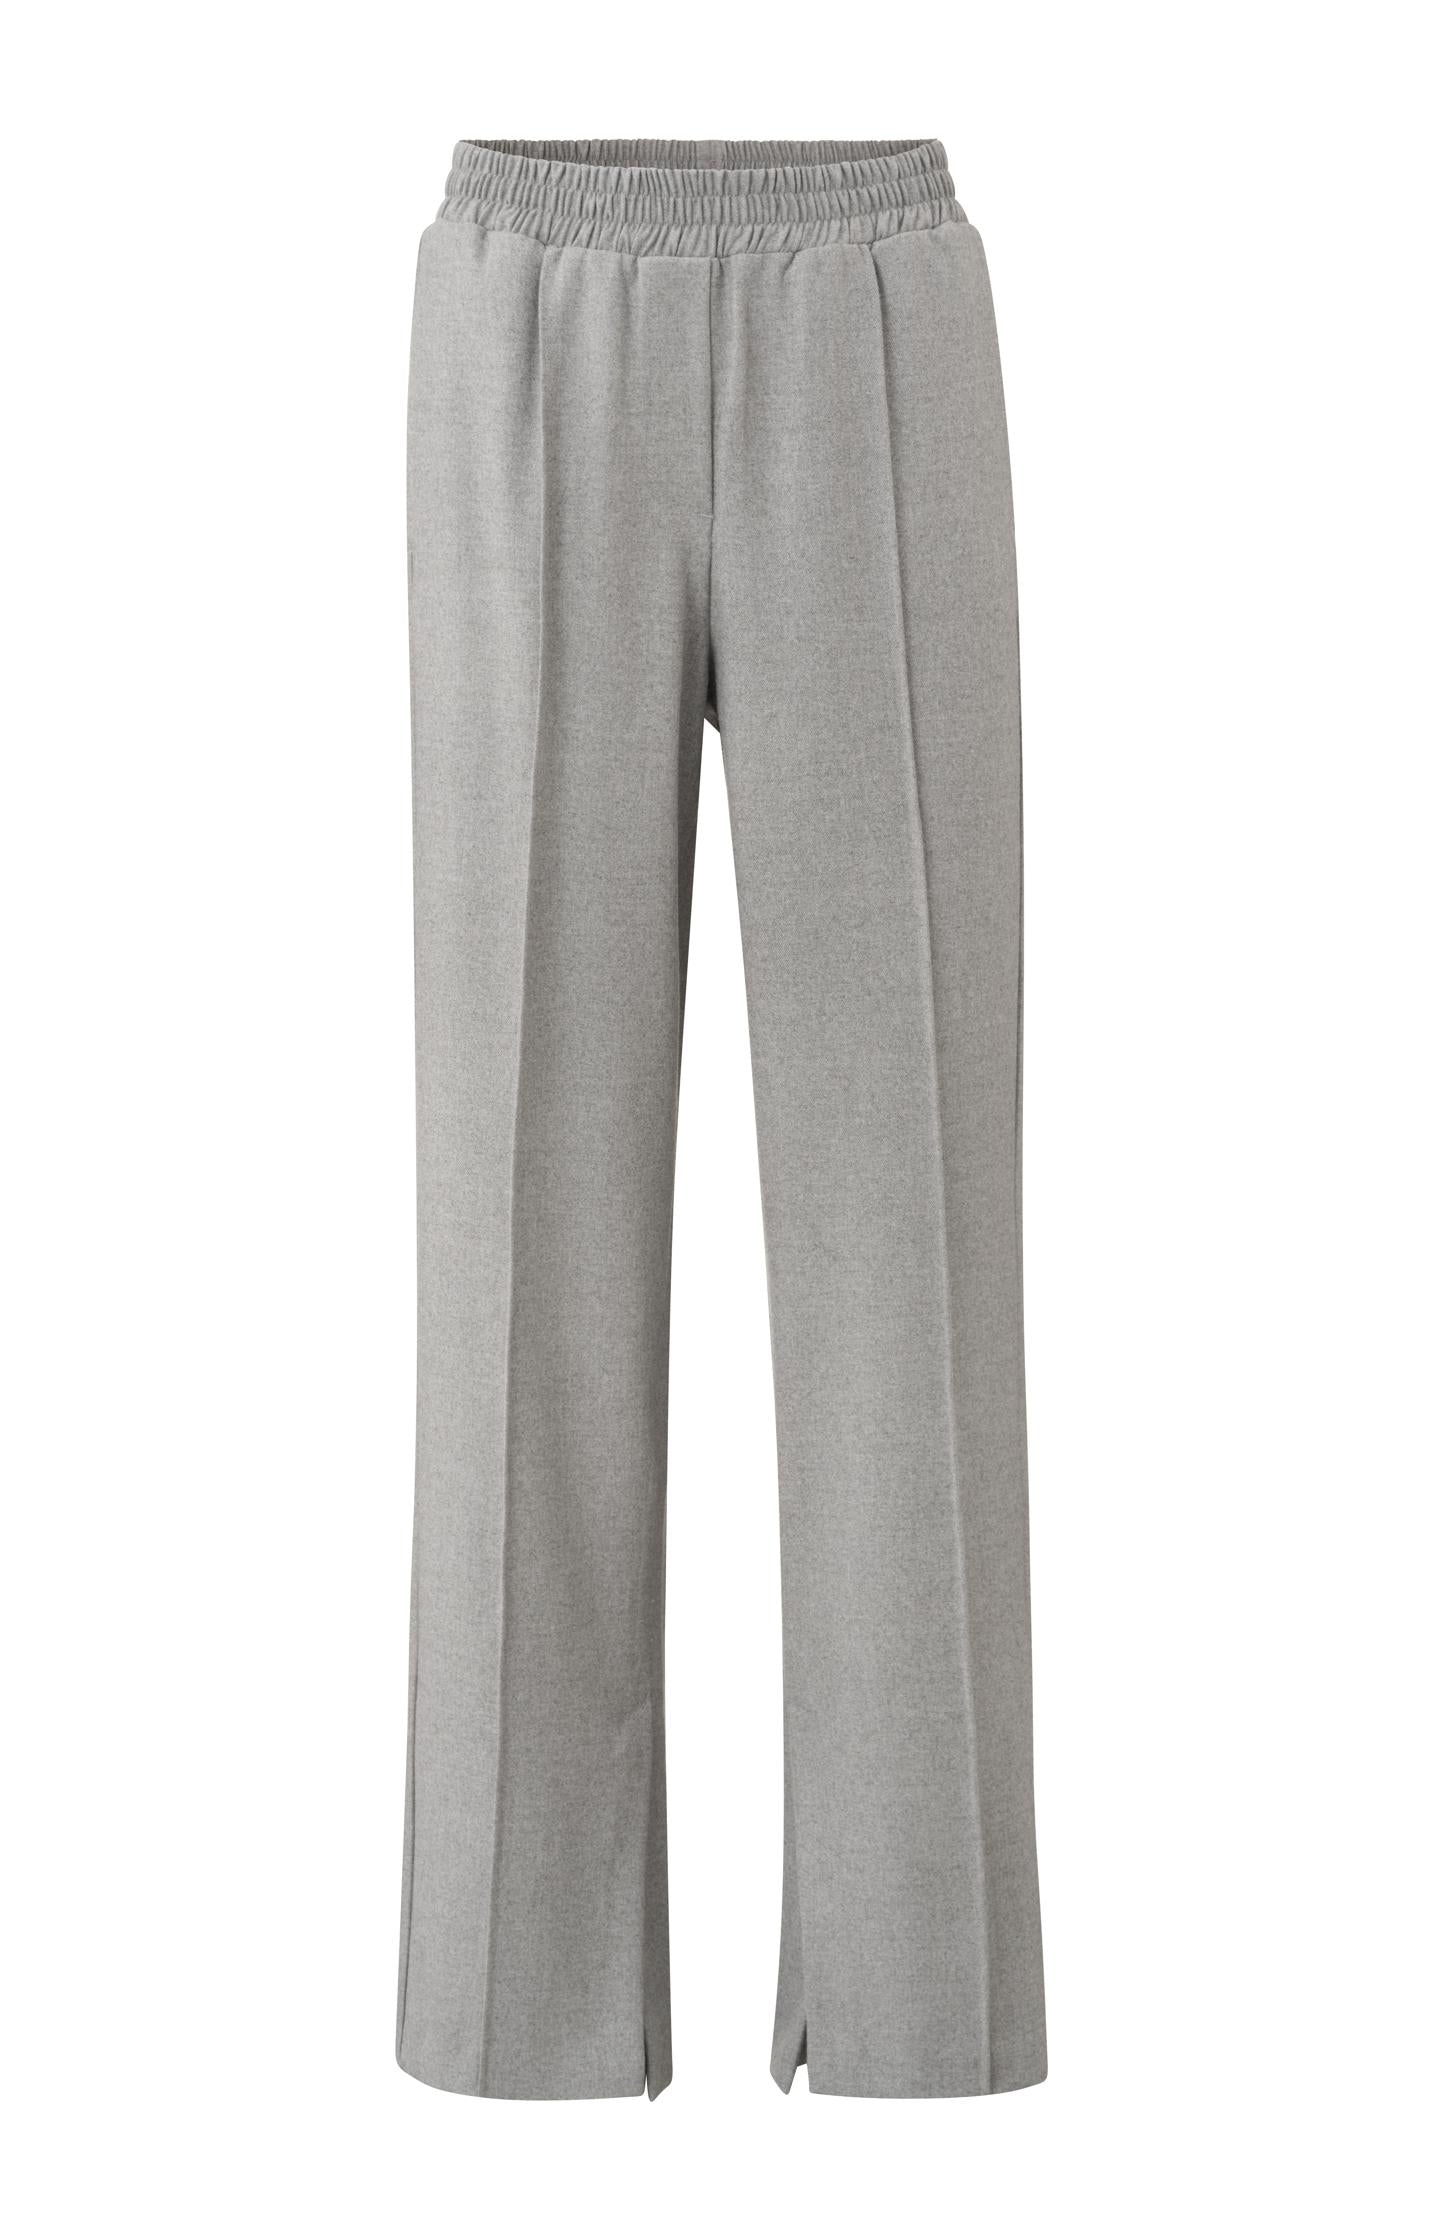 Soft wide leg trousers with elastic waist and a slit - Type: product